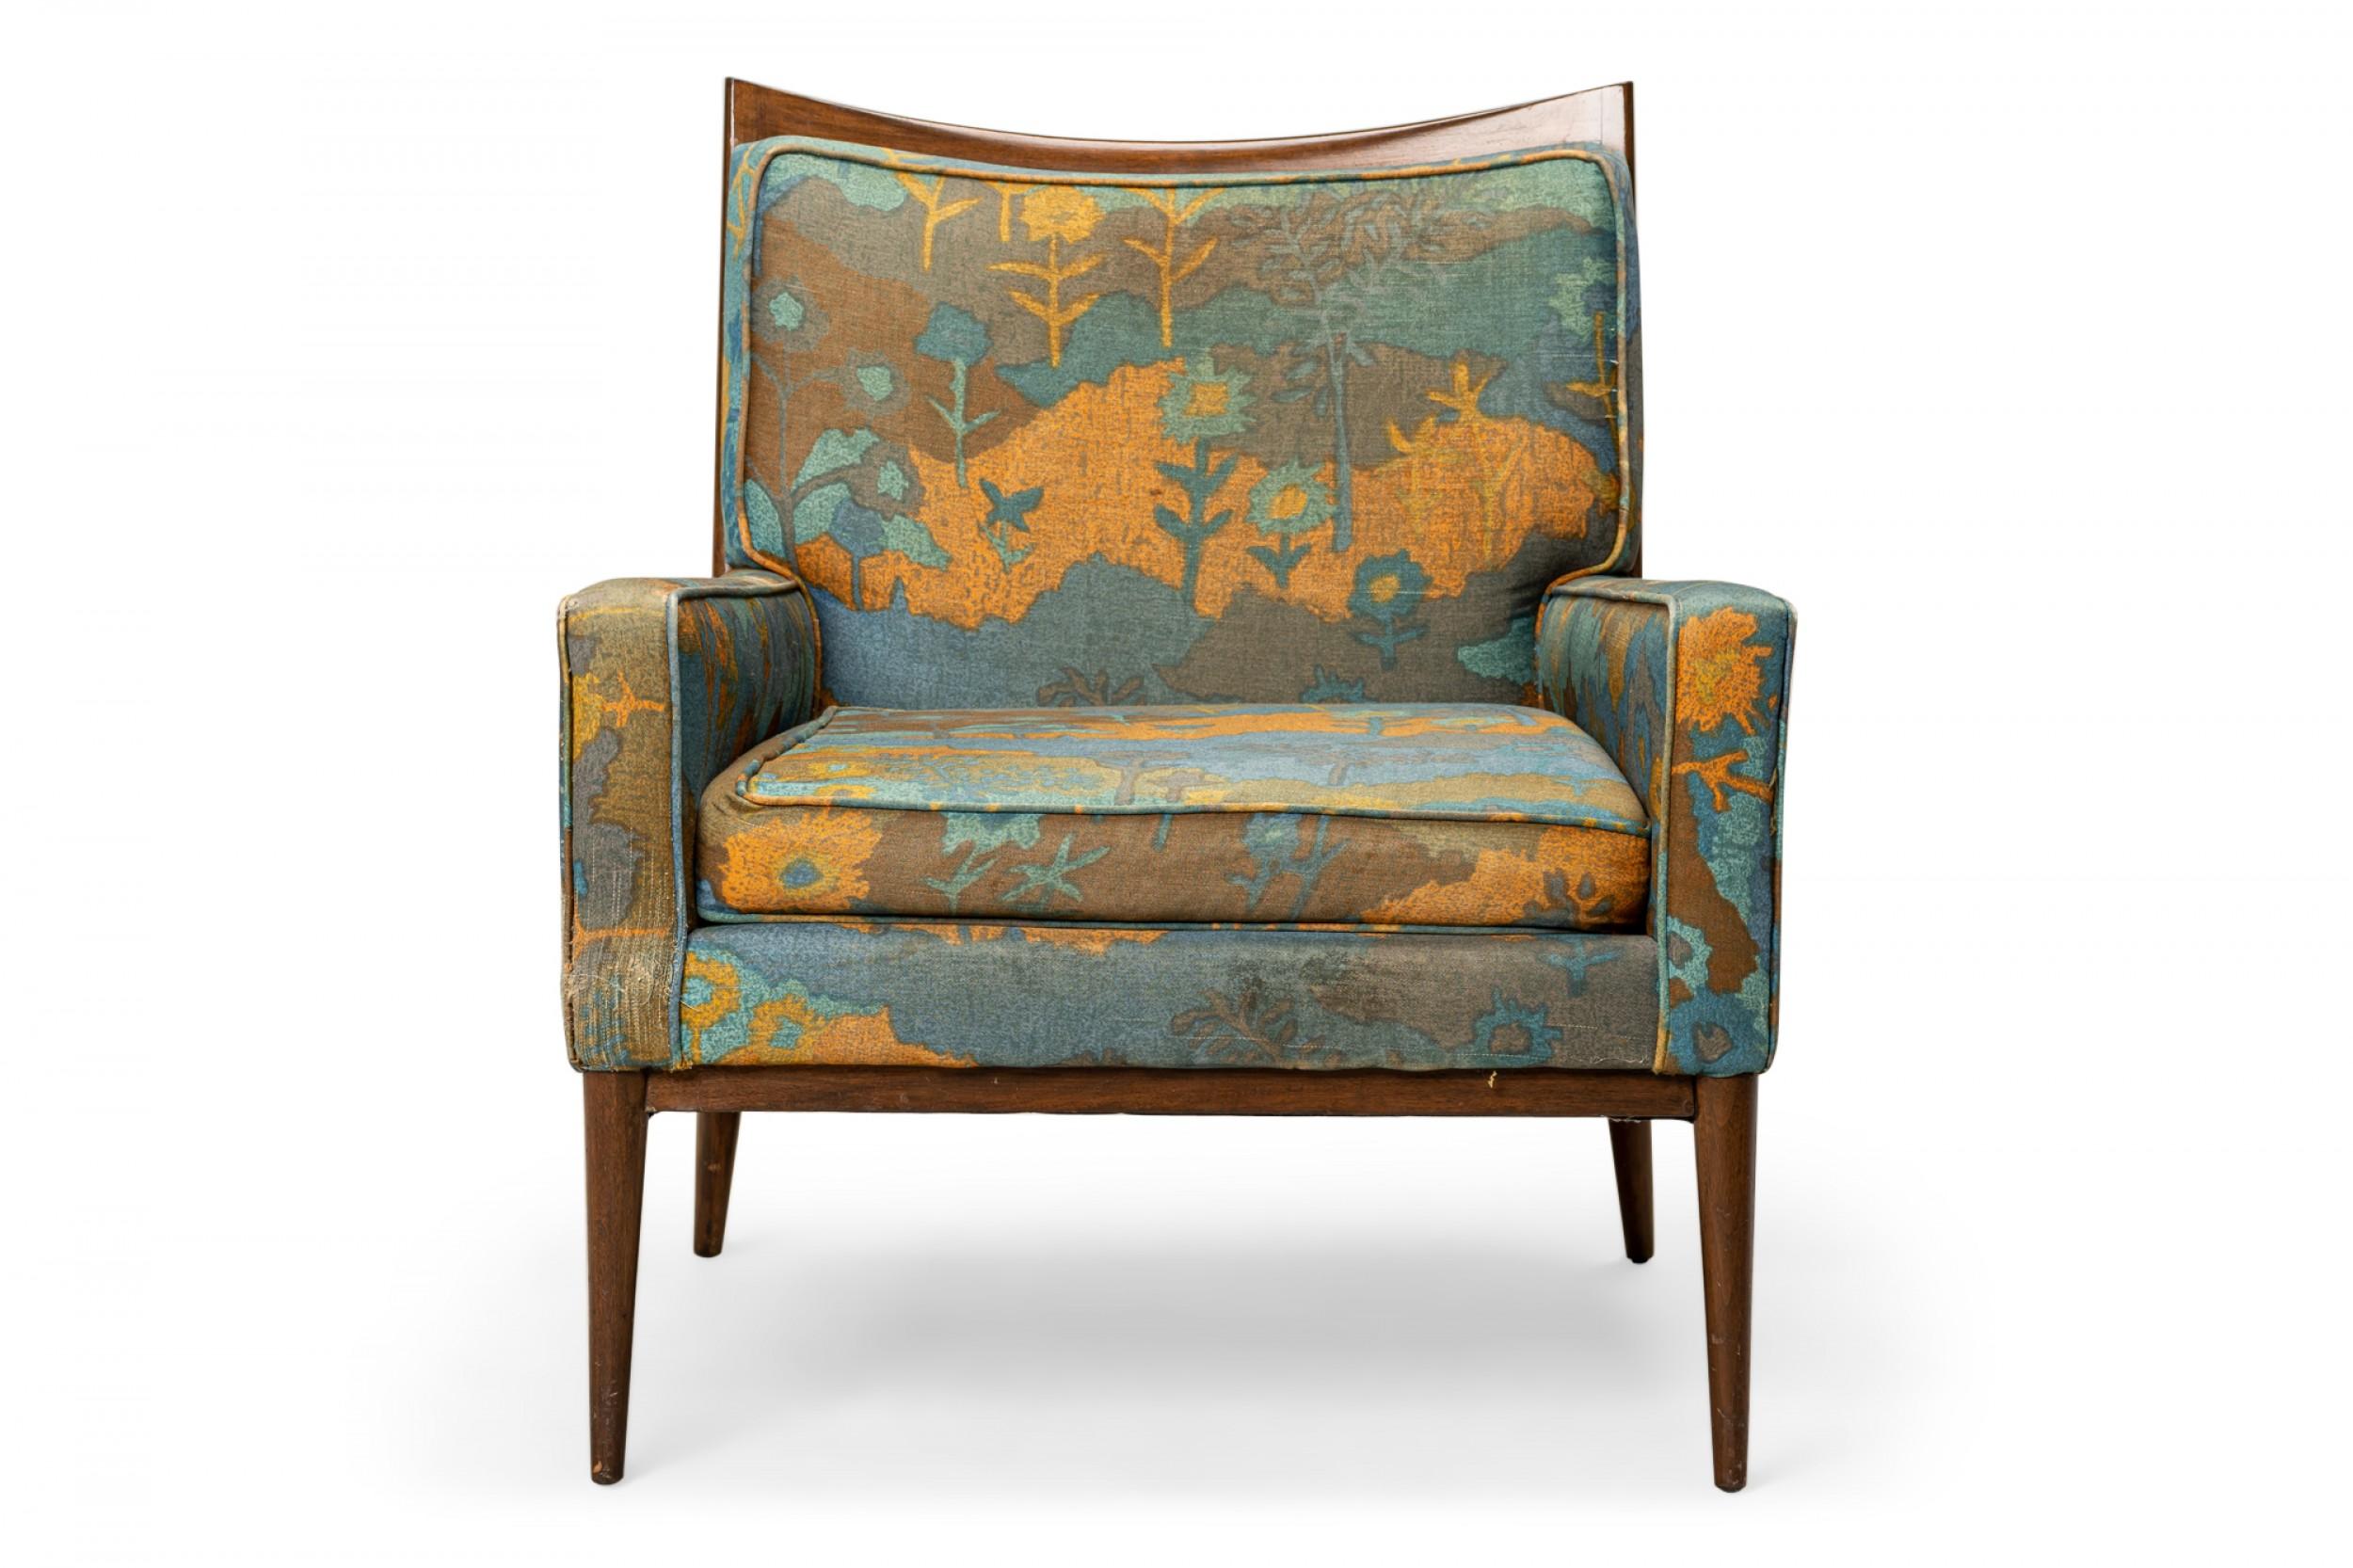 American mid-century lounge / armchair with a walnut frame with a scooped back rail and blue, orange, and brown floral patterned fabric upholstery, resting on four tapered dowel legs. (PAUL MCCOBB FOR DIRECTIONAL)